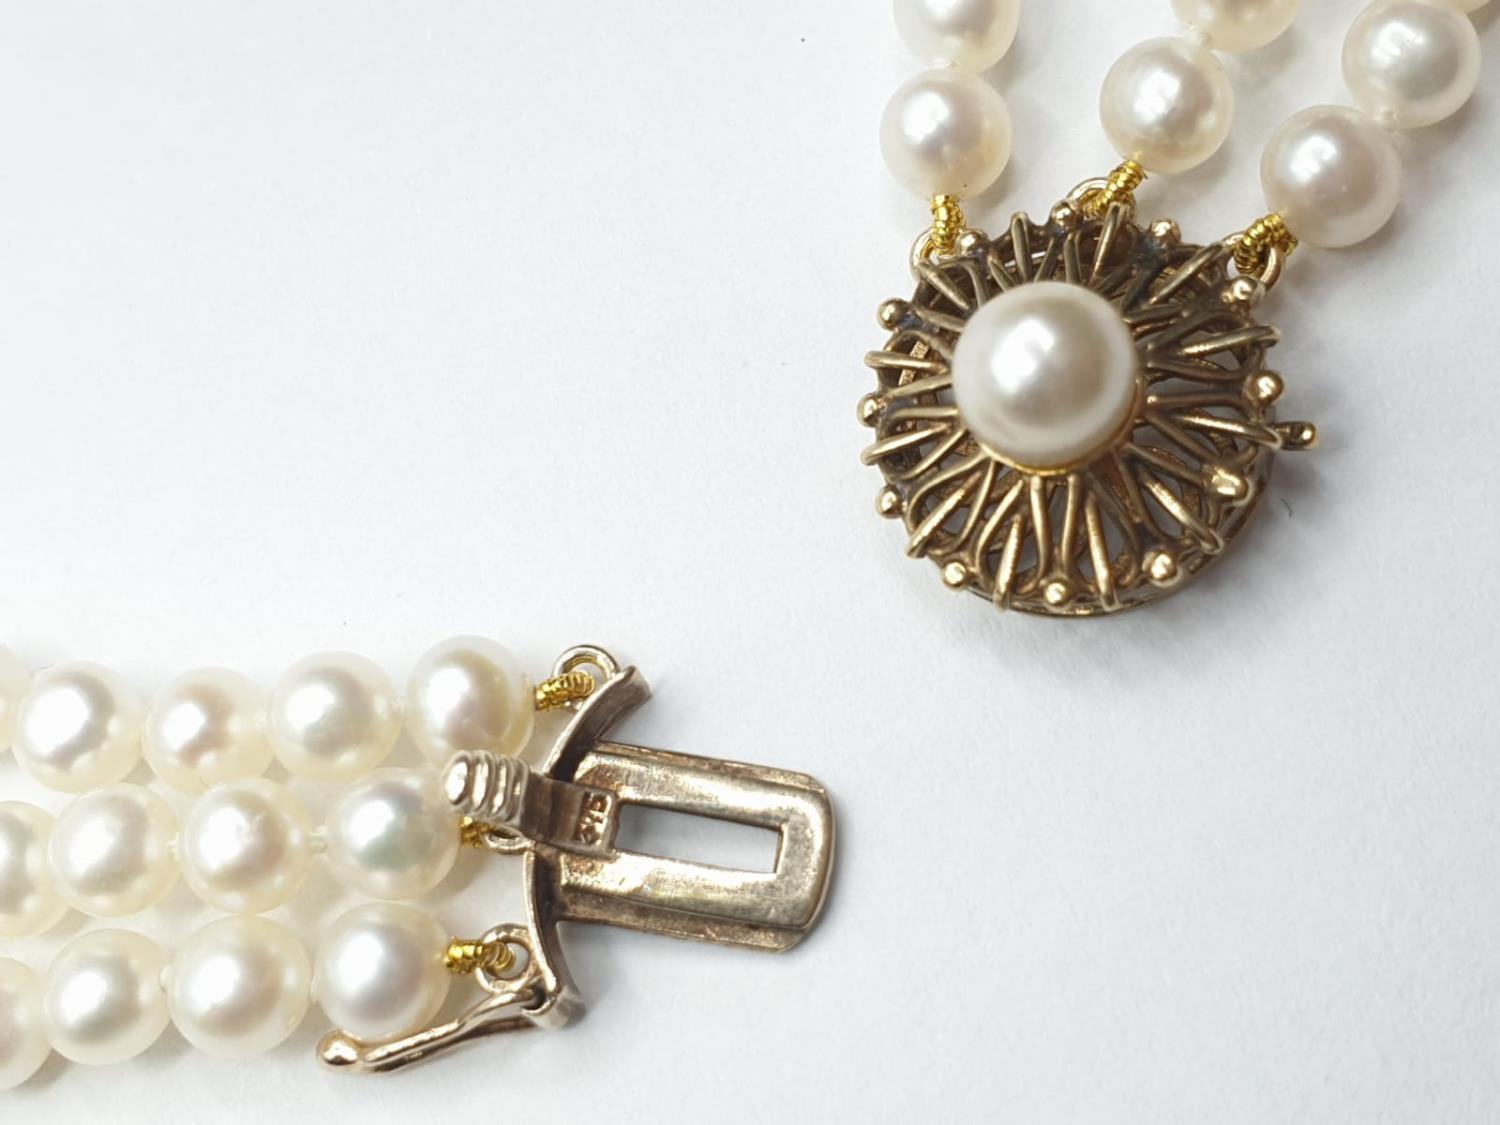 3 rows of Cultured pearl necklace set in 9ct gold clasp , weight 49g and 46cm long approx - Image 6 of 6